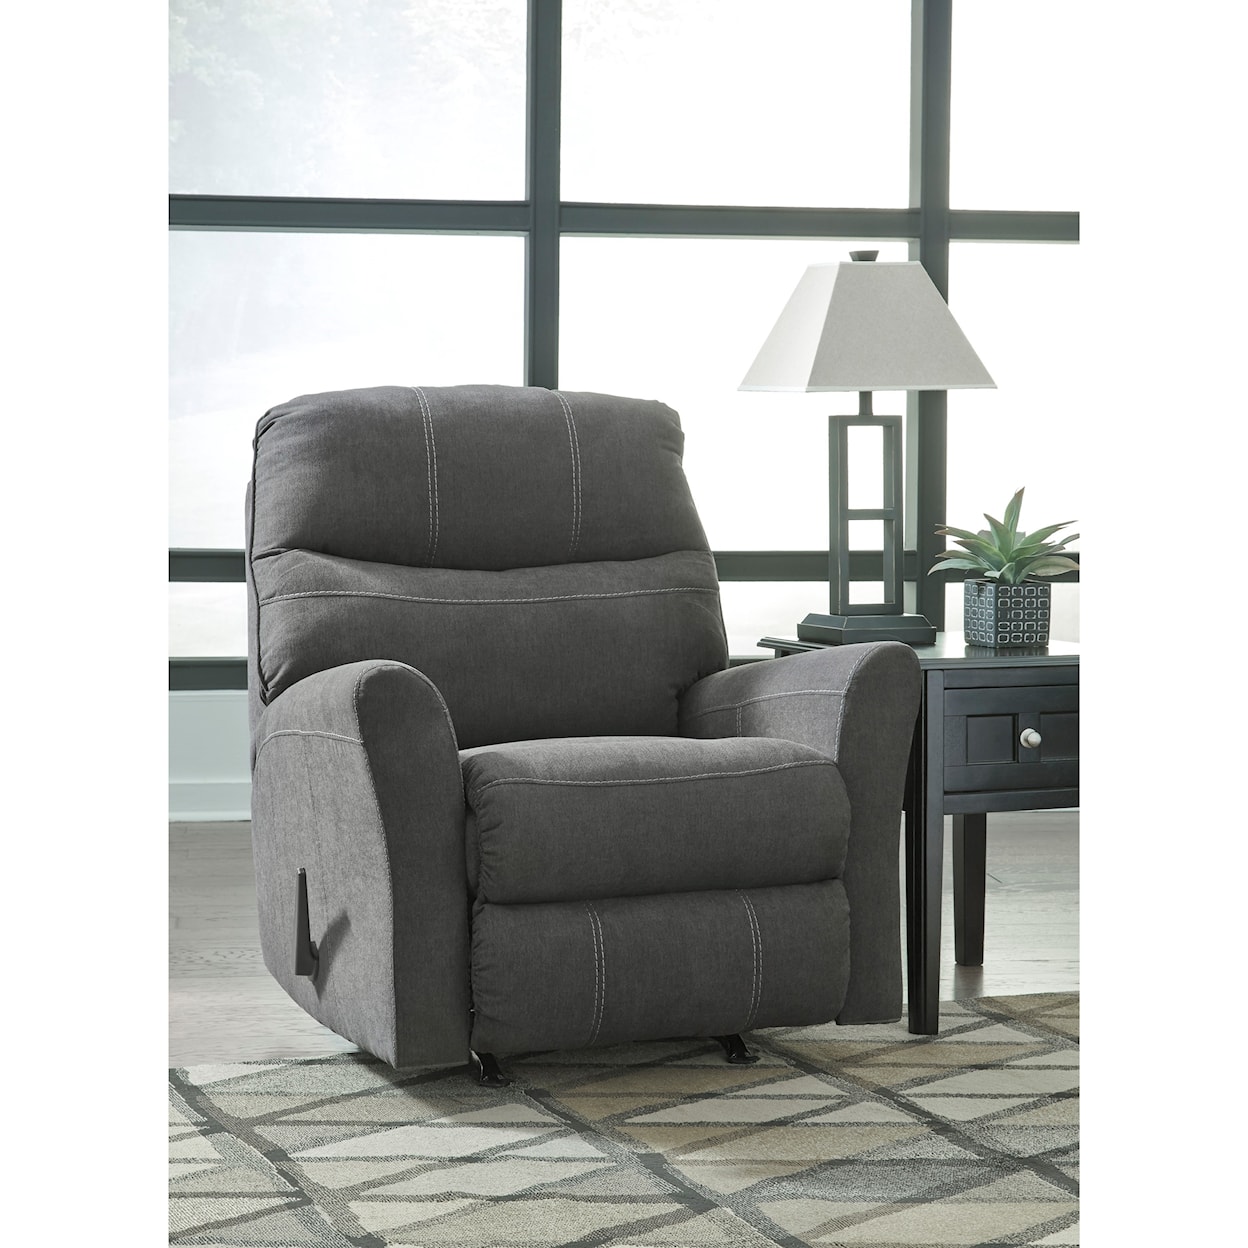 Benchcraft Mayberry Recliner